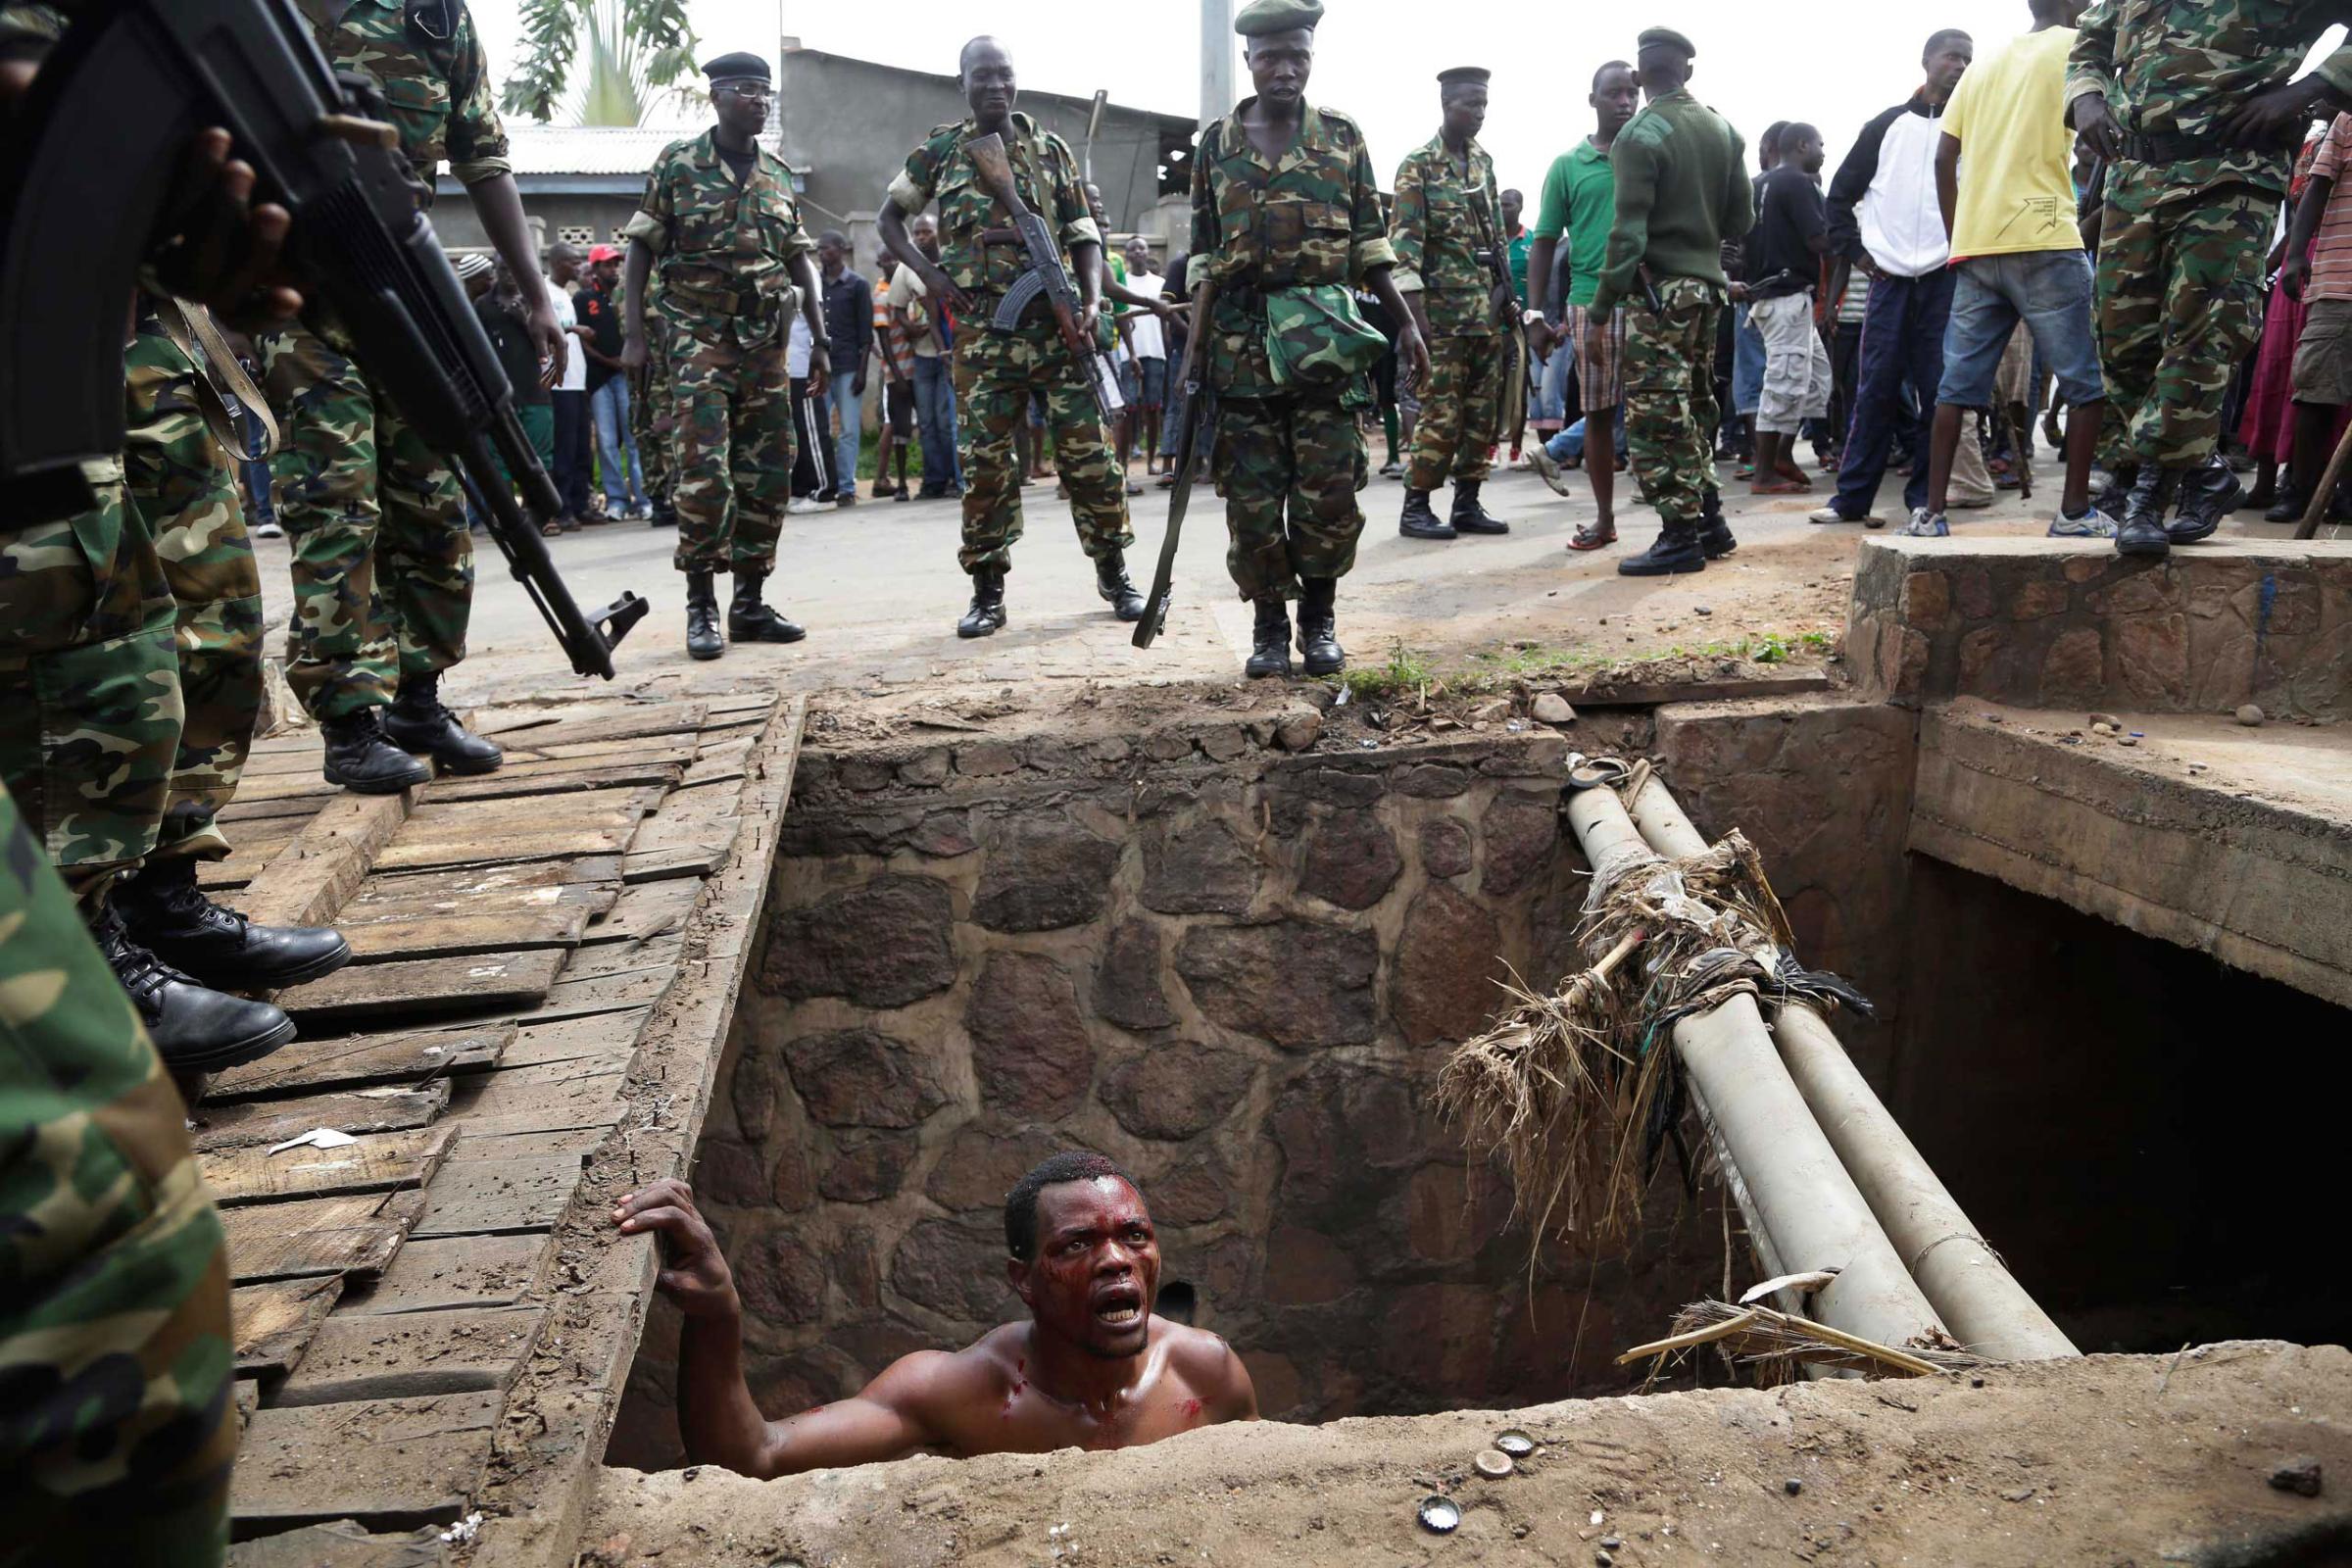 Jean Claude Niyonzima, a suspected member of the ruling party's Imbonerakure youth militia, pleads with soldiers to protect him from a mob of demonstrators after he emerged from hiding in a sewer in the Cibitoke district of Bujumbura, Burundi. Niyonzima escaped the lynching by running into the sewer. May 7, 2015